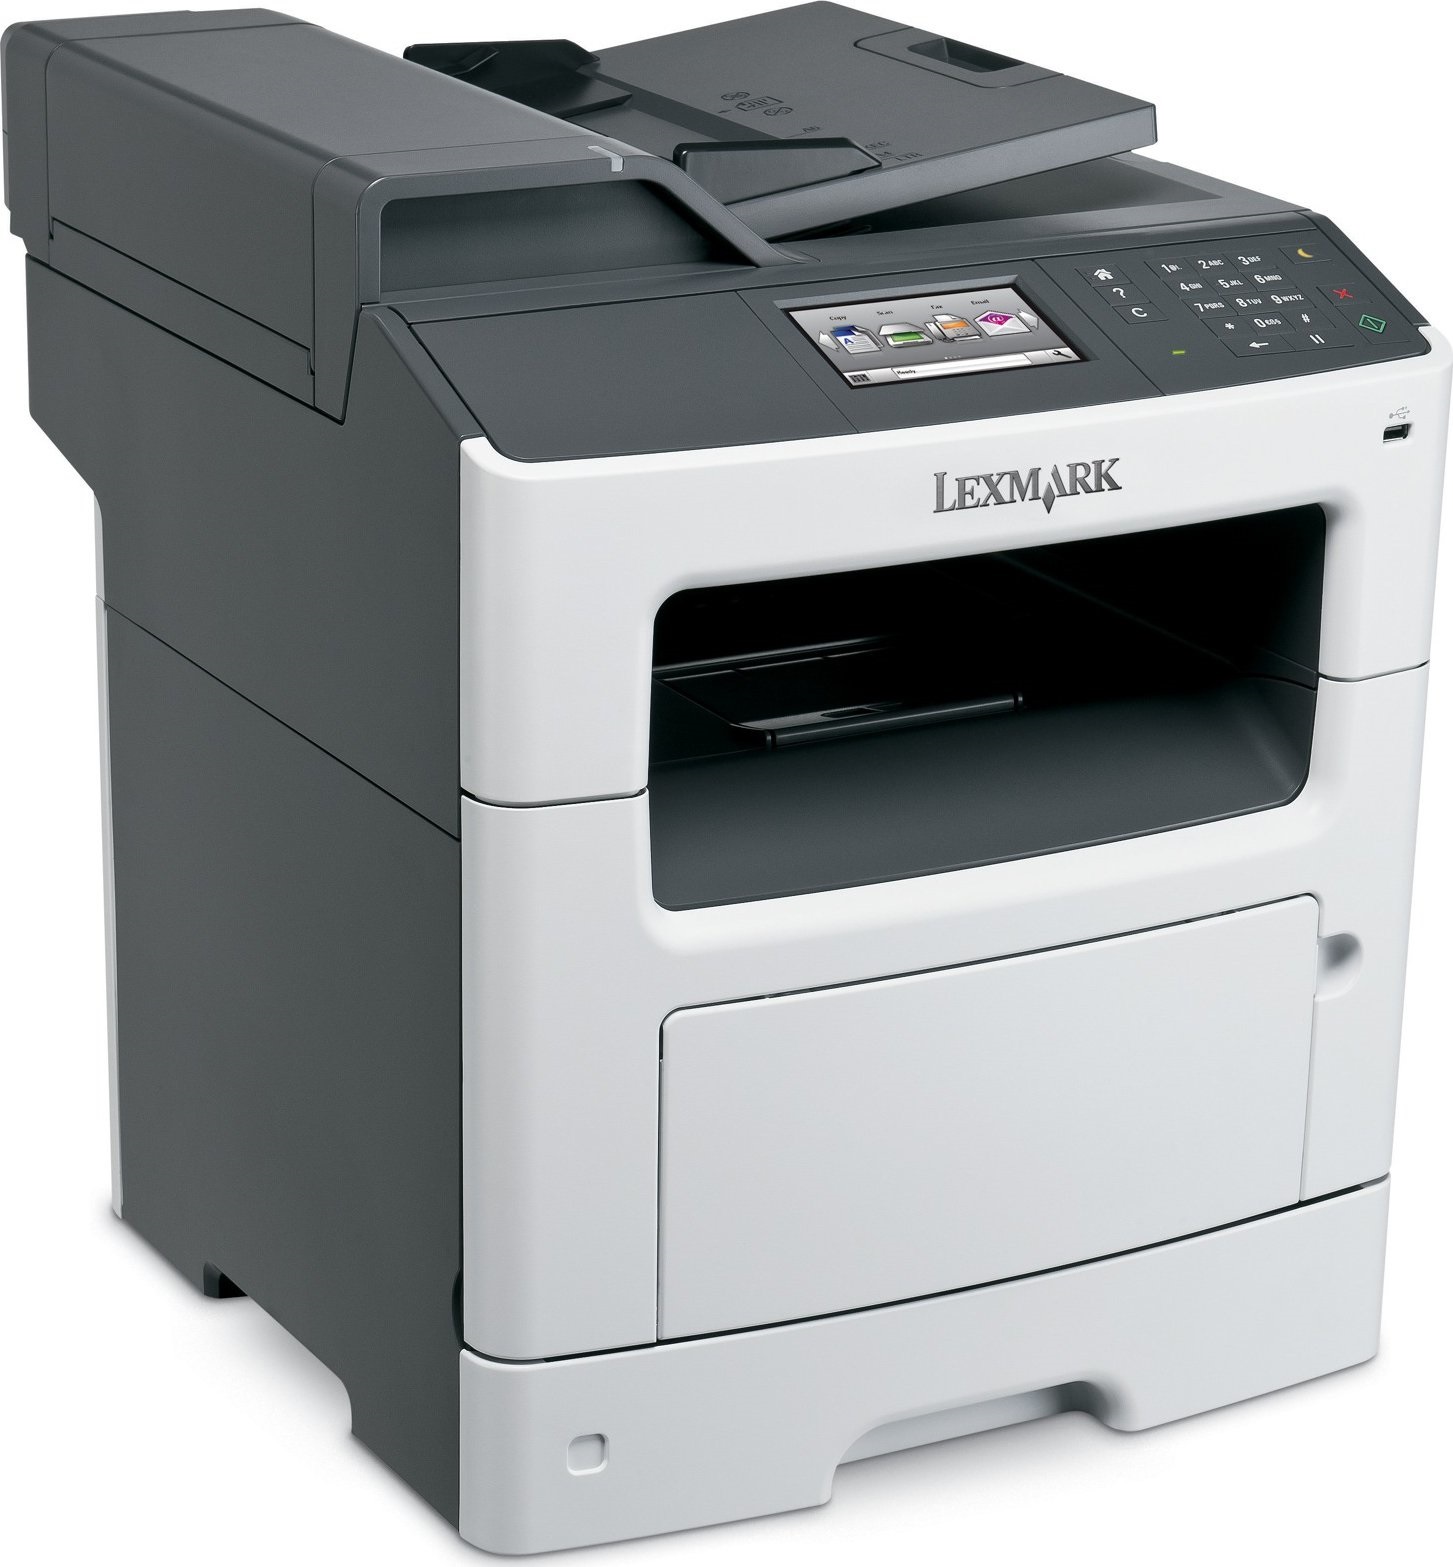 МФУ Lexmark Multifunction Mono Laser MX417de p/c/s/, A4, 38 ppm, 512 Mb, 1 tray 150, USB, Cartridge 2500 pages in box, 1+3y warr-24657